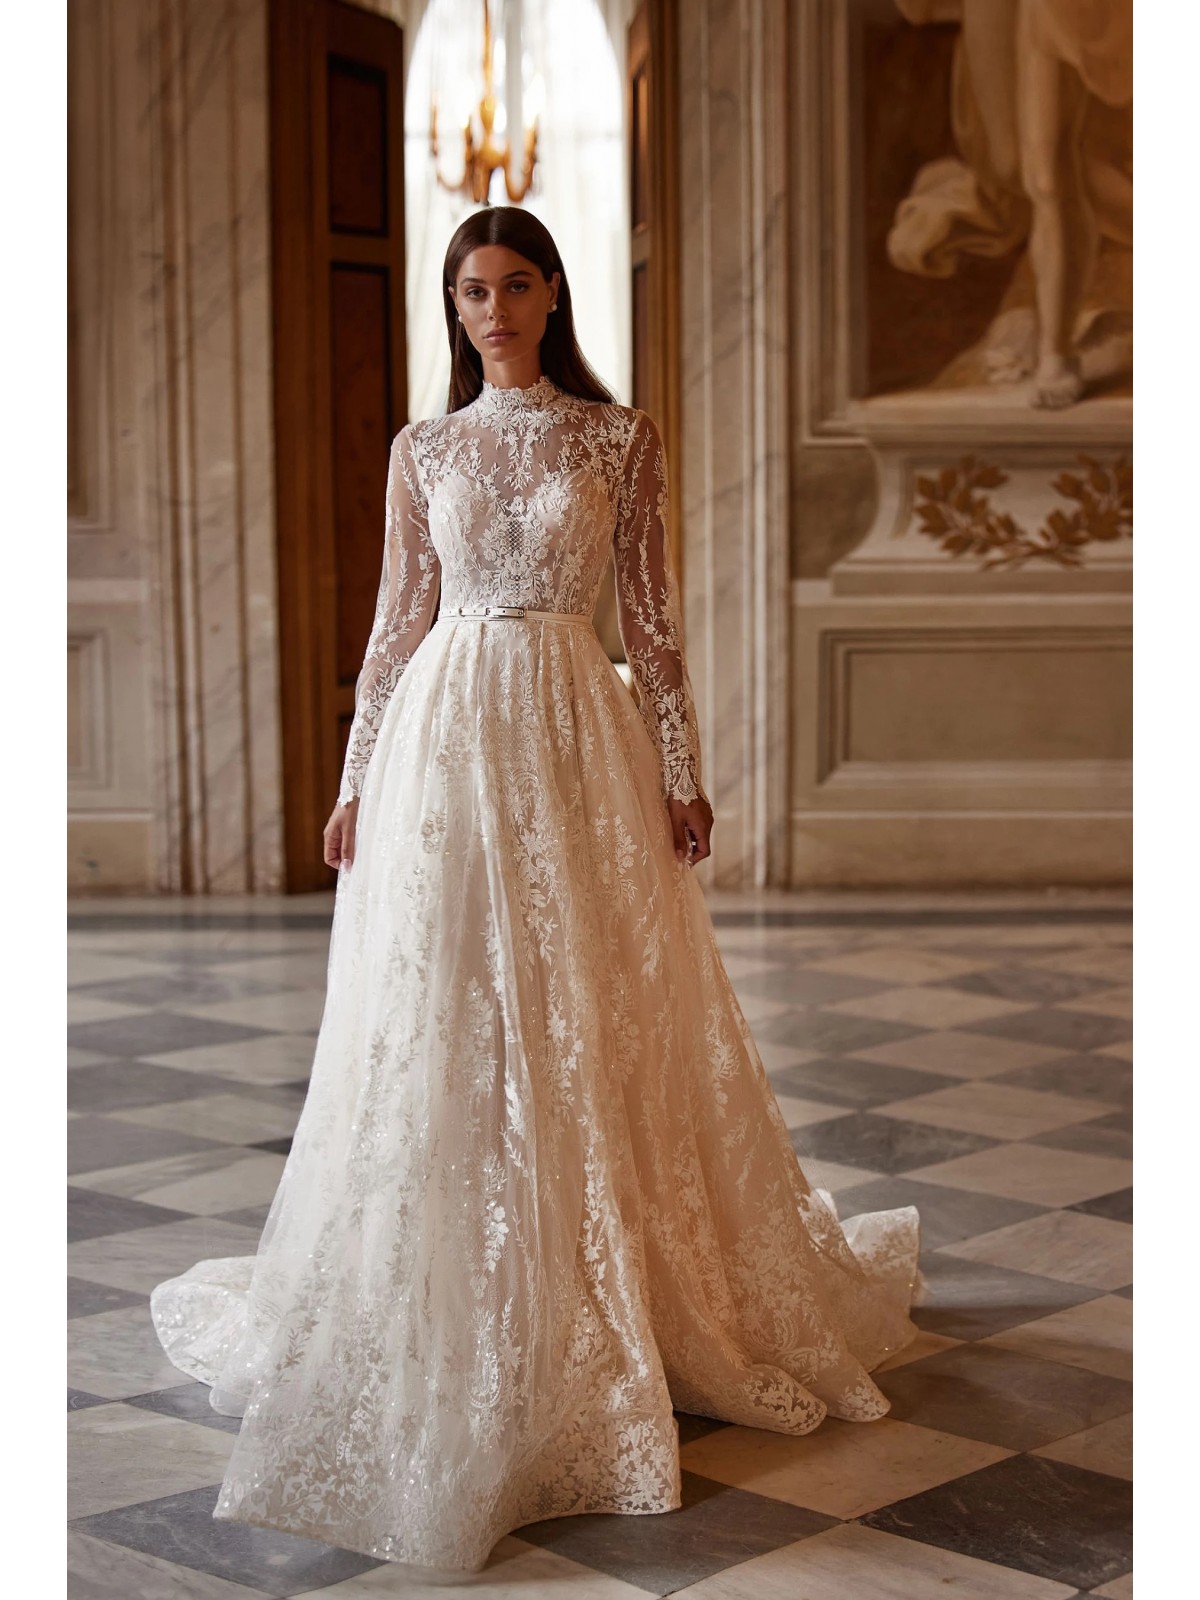 Luxury Wedding Dress - Delicate Lace A-line with Stand-up Collar and Long Sleeves - Lacework Treasure - LIDA-01346.00.00